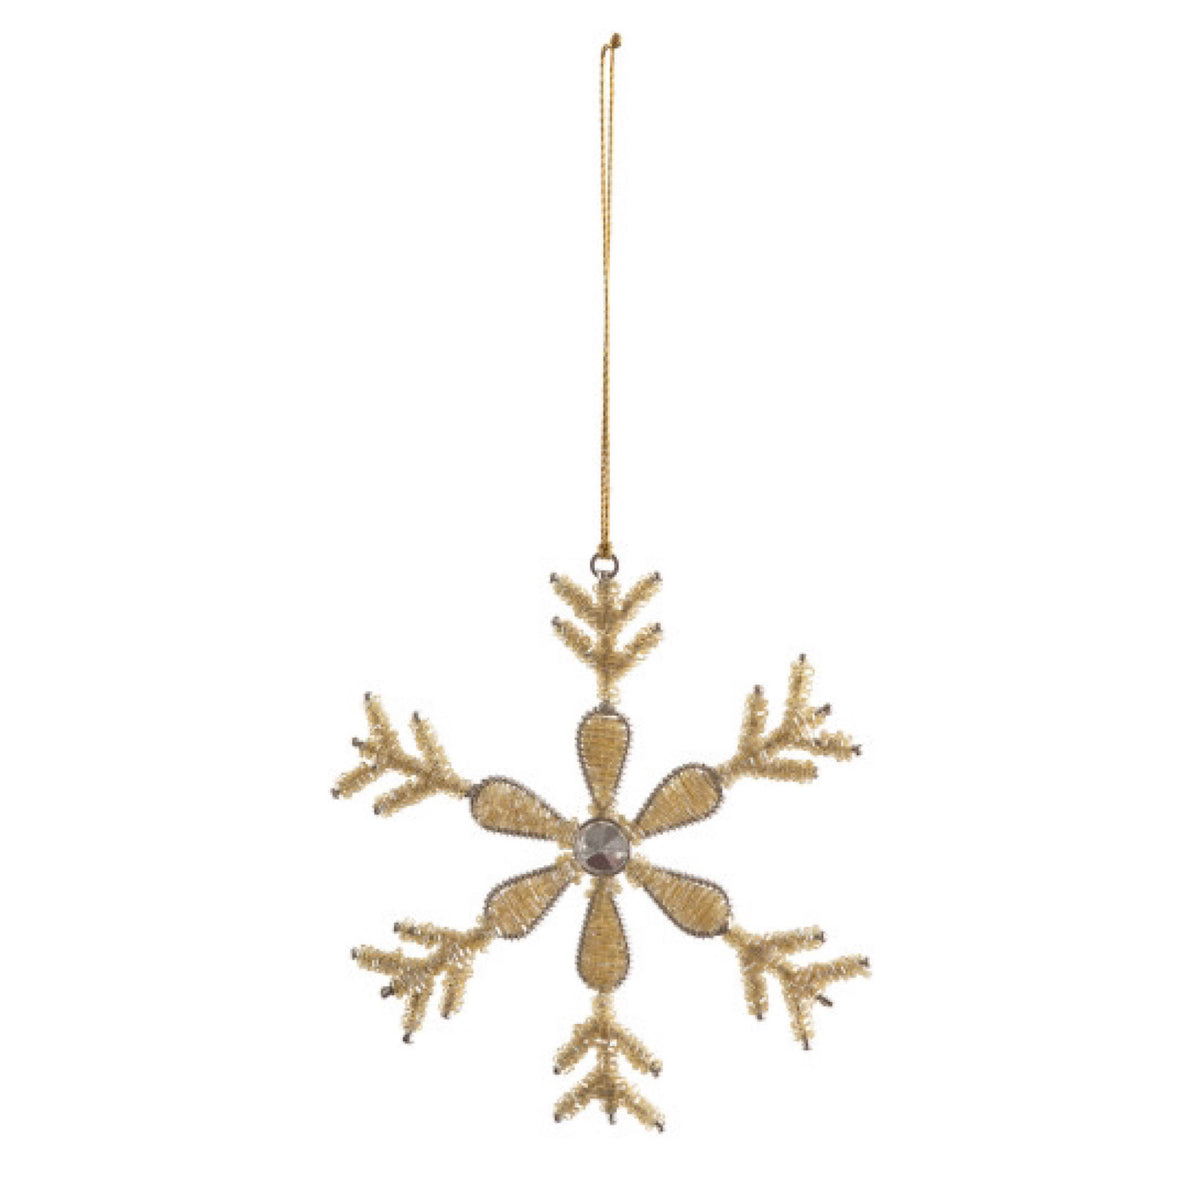 Glass Bead Snowflake Ornaments, Gold Finish, 2 Sizes